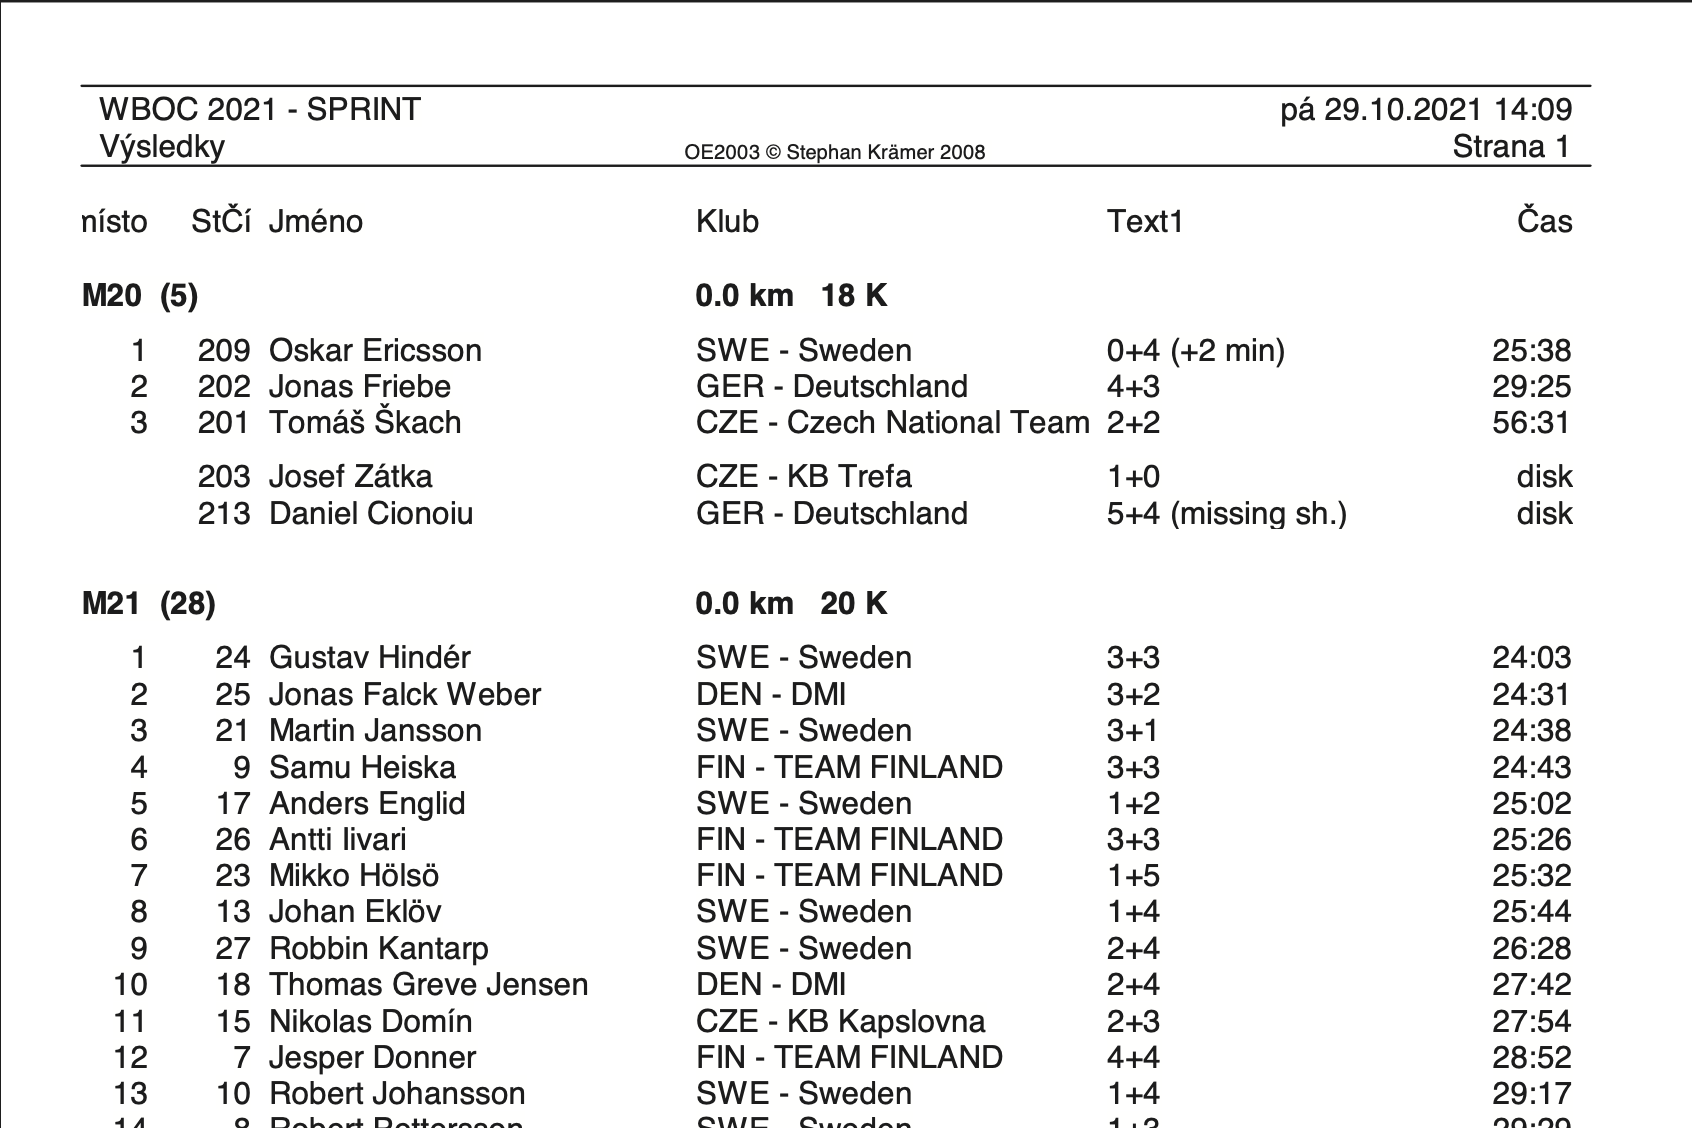 Download SPRINT results